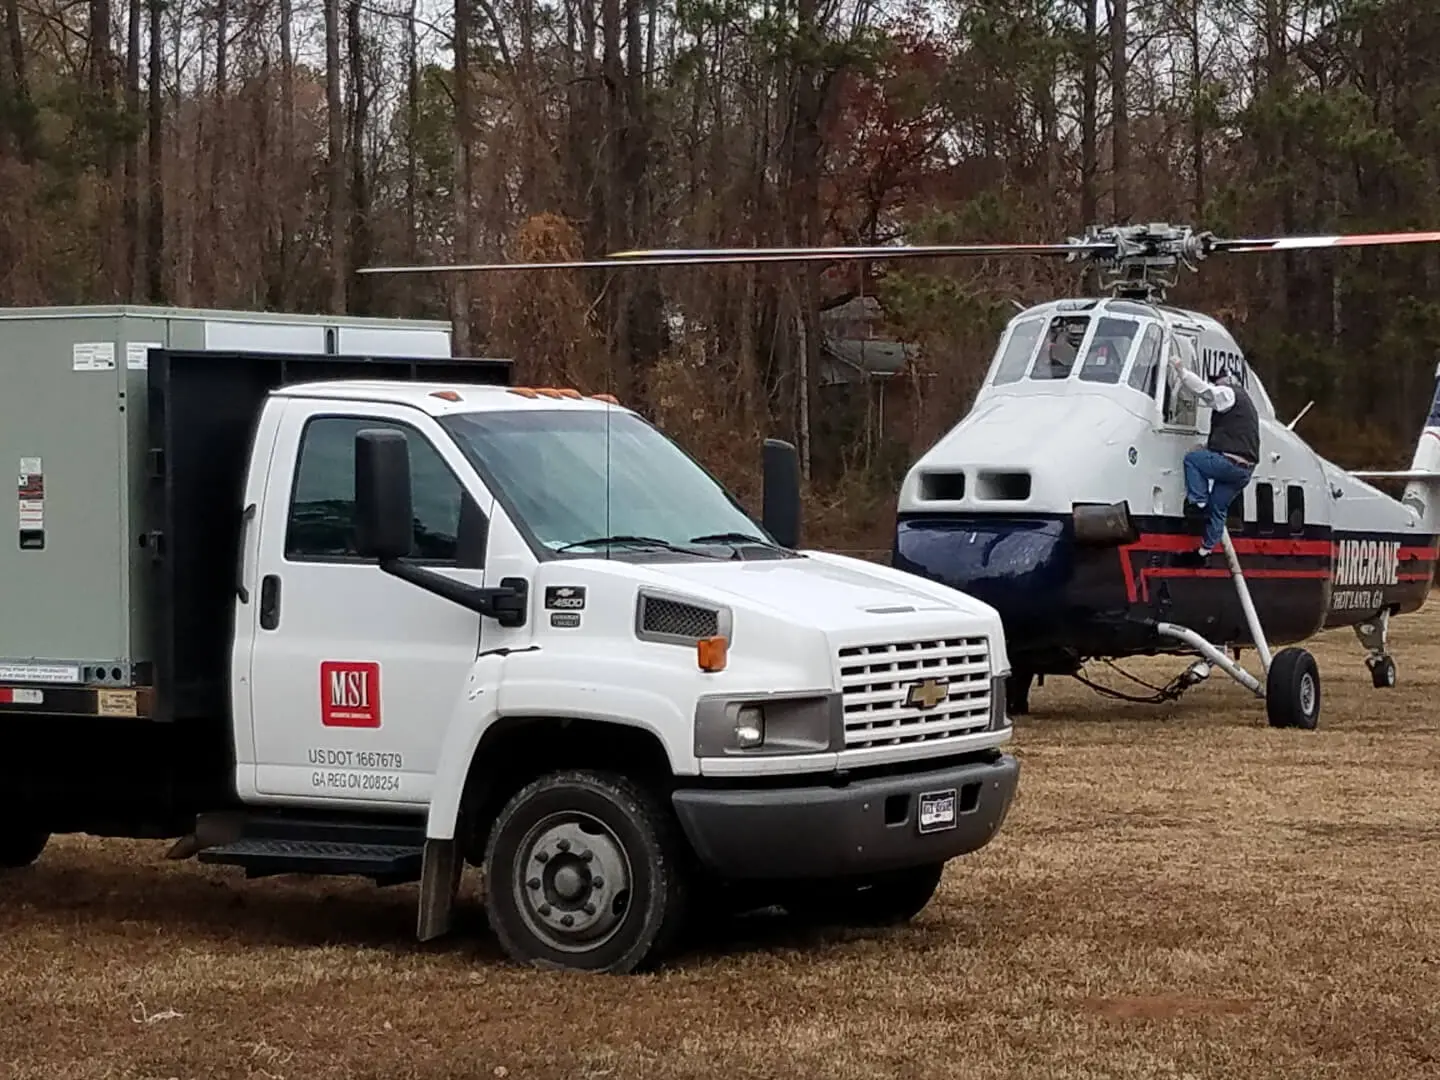 A truck parked in front of a helicopter with trees in the background